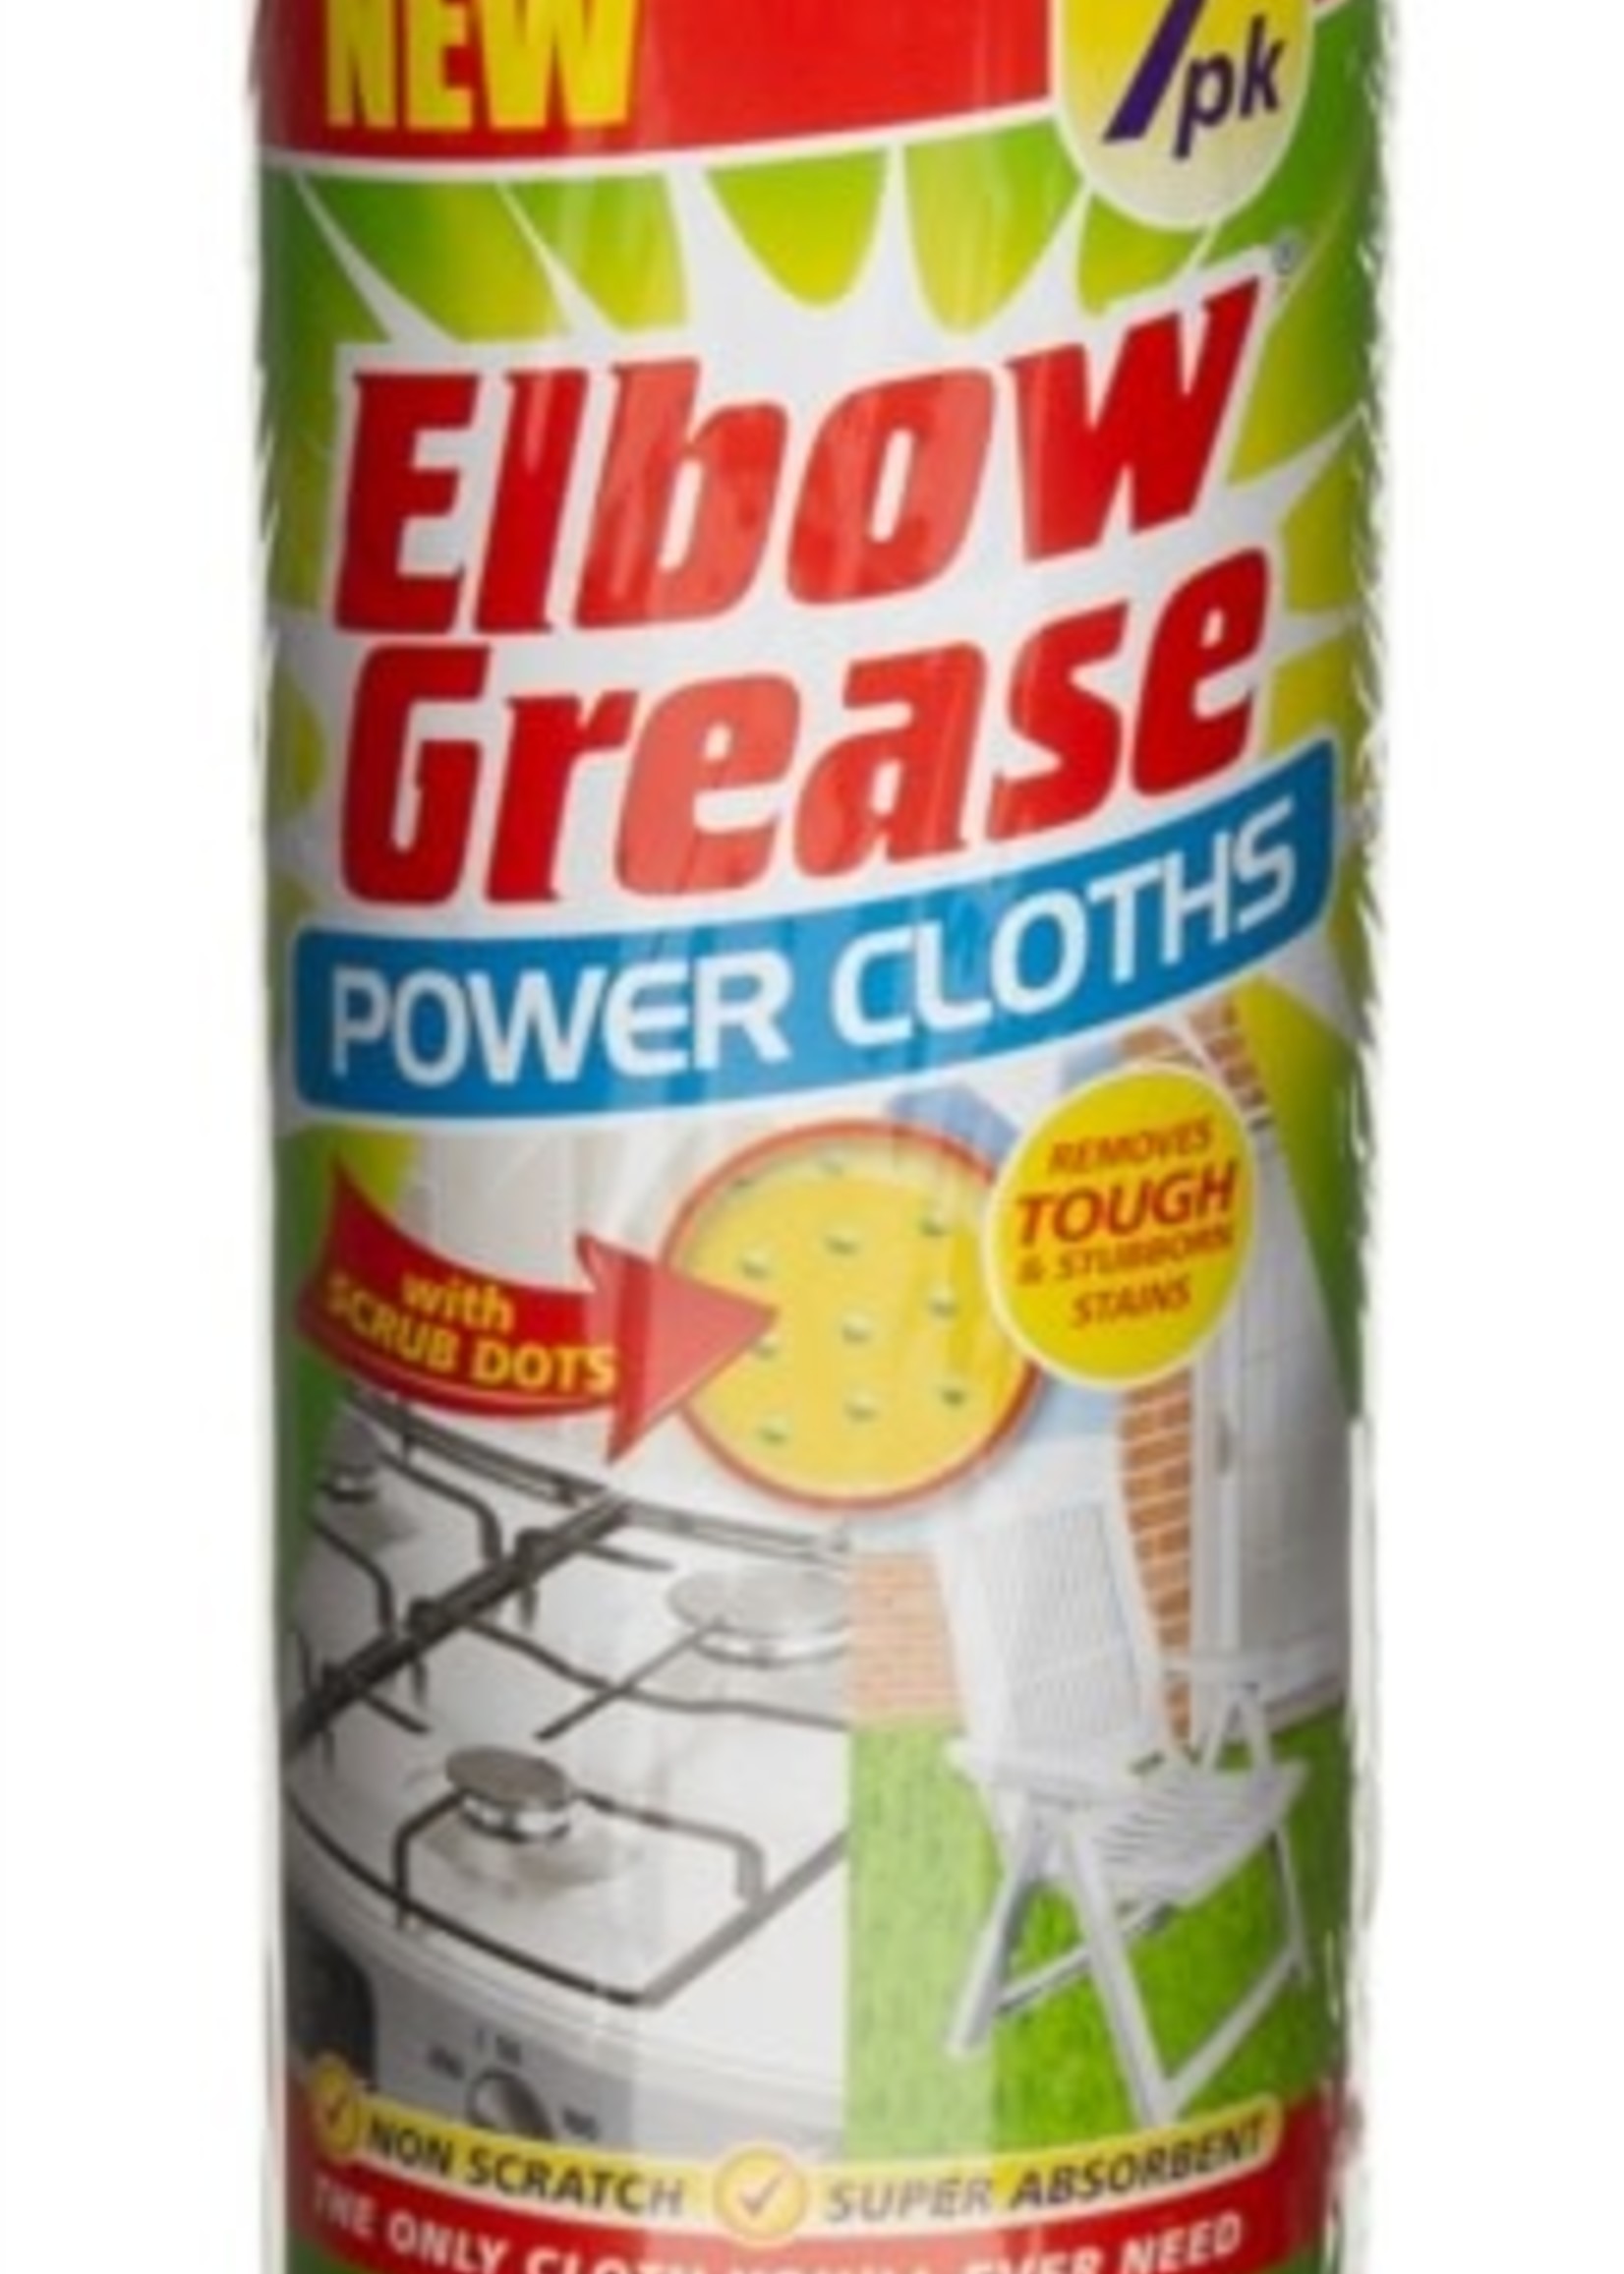 Elbow Grease Elbow Grease Power Cloths 7 Pack